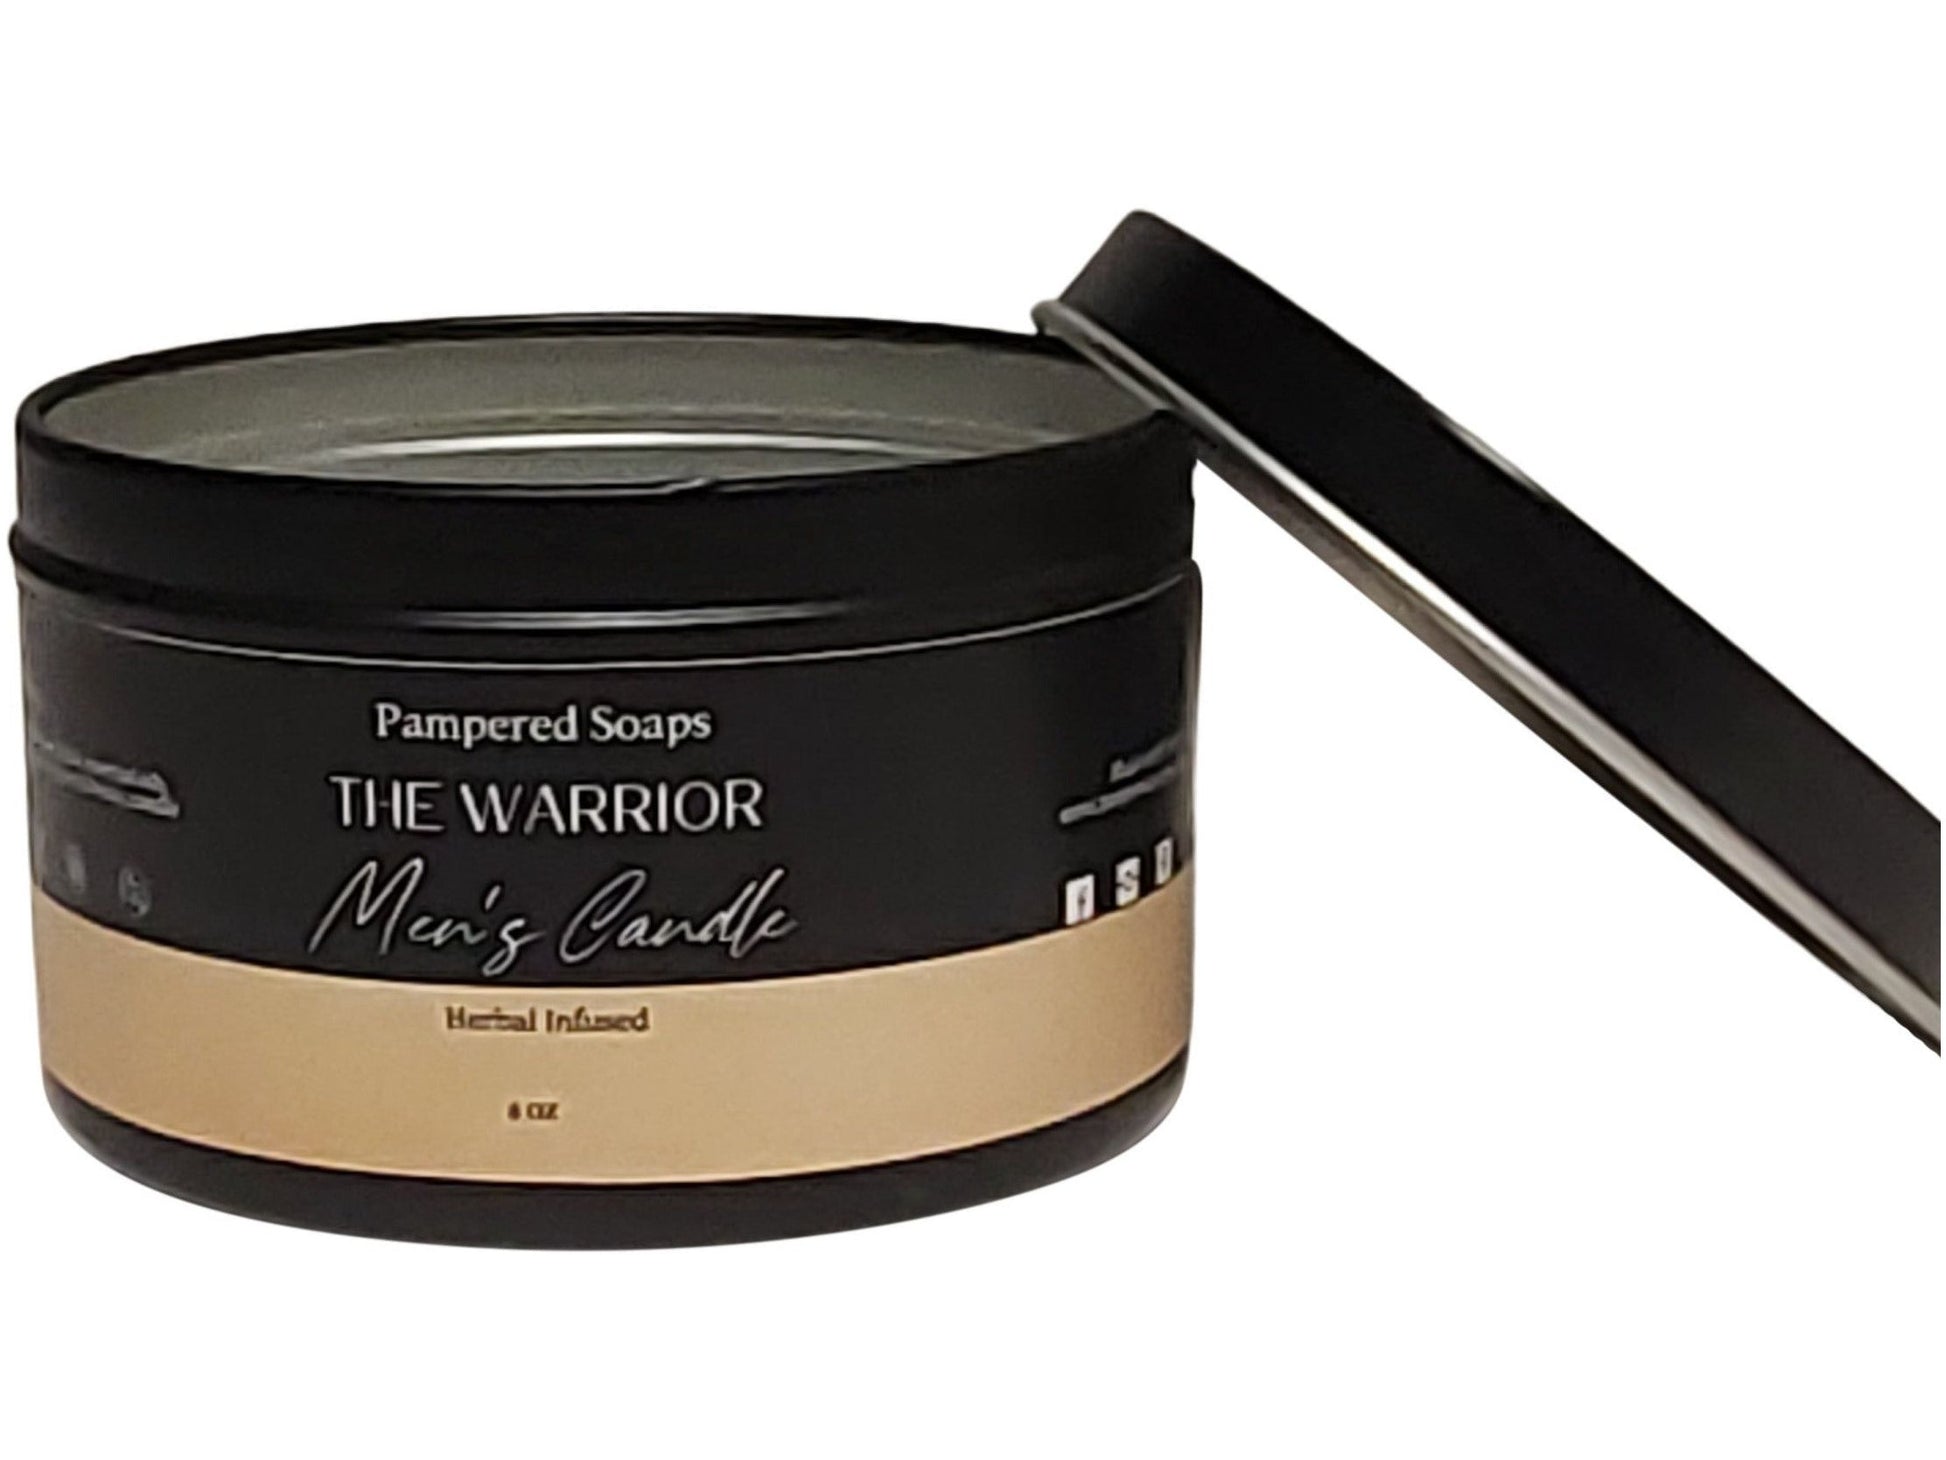 The Warrior Men's Candle Pampered Soaps